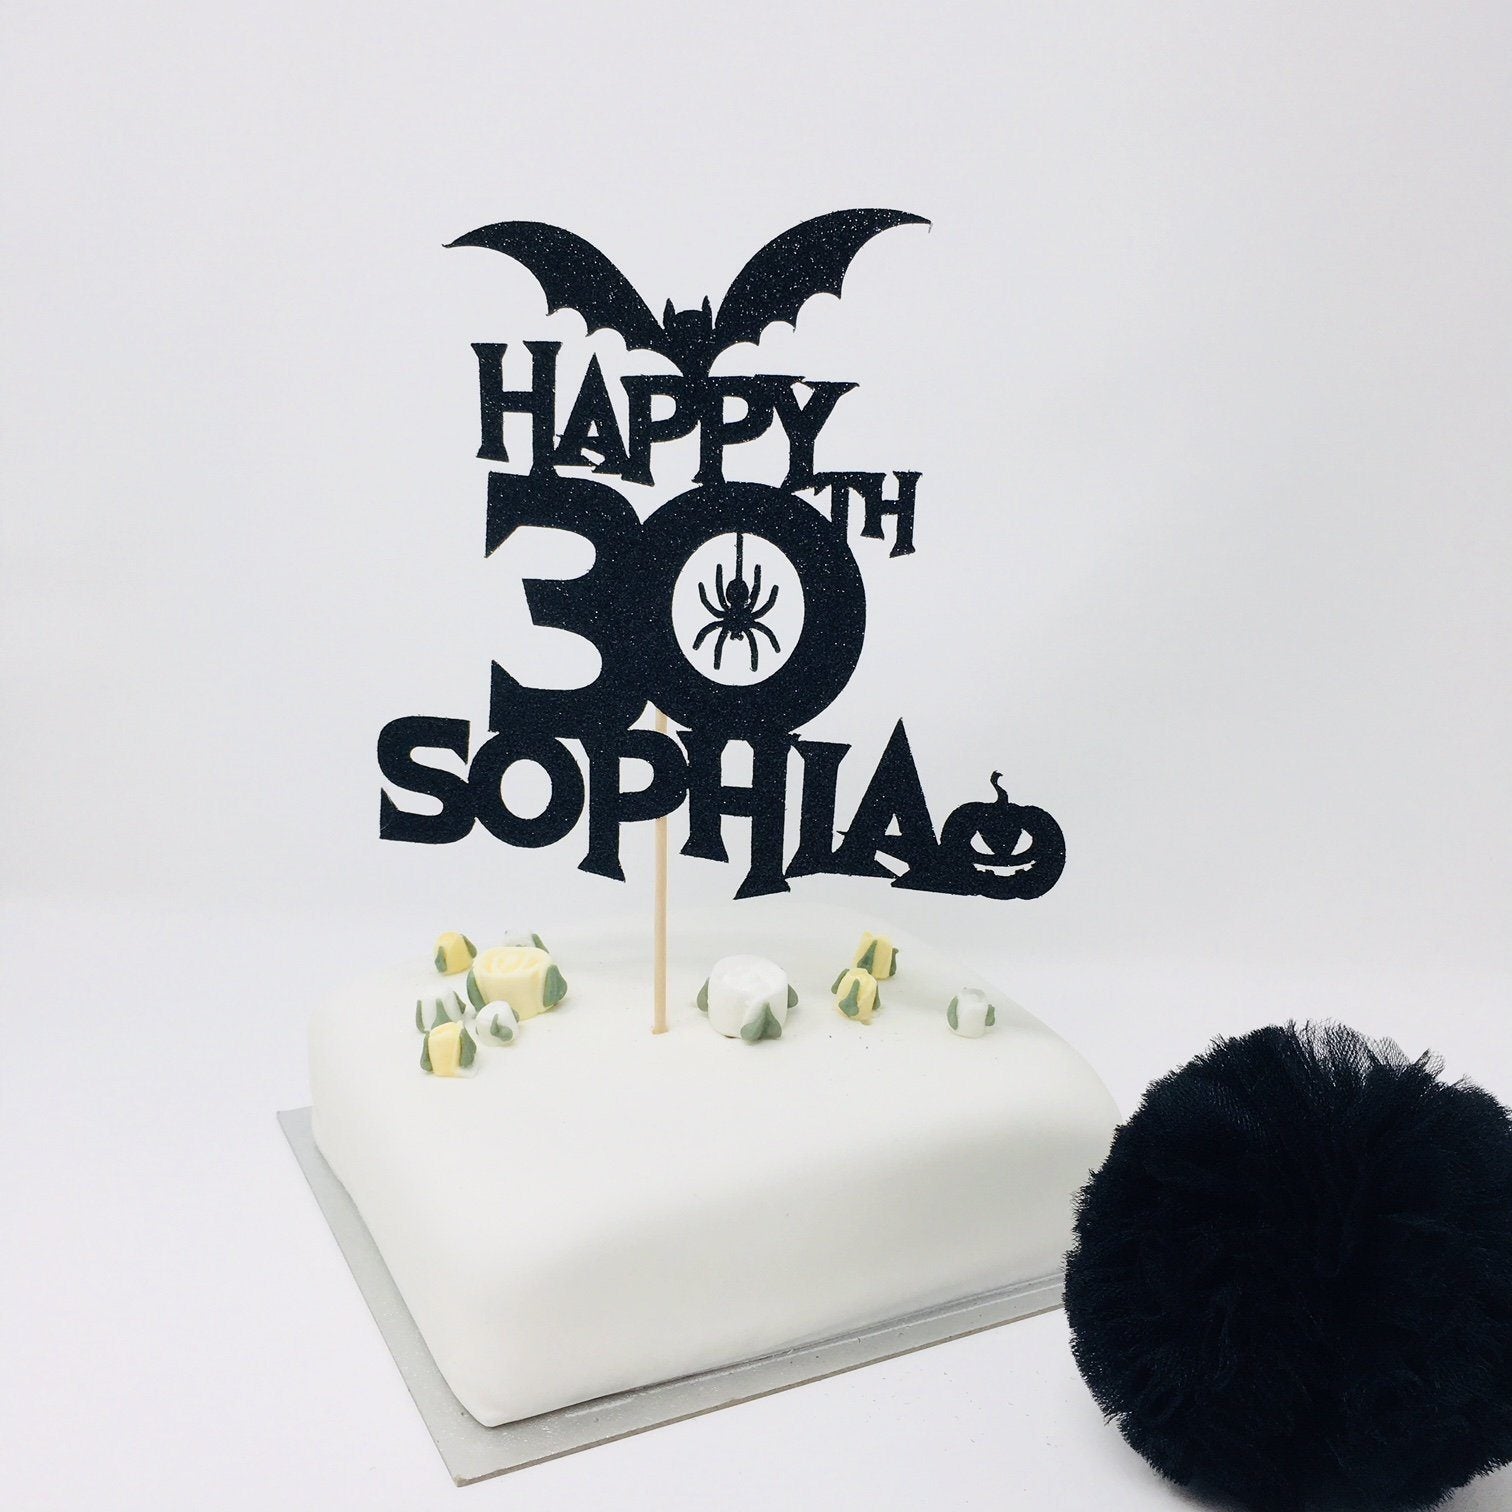 Personalised Name and Age Halloween Birthday Cake Topper